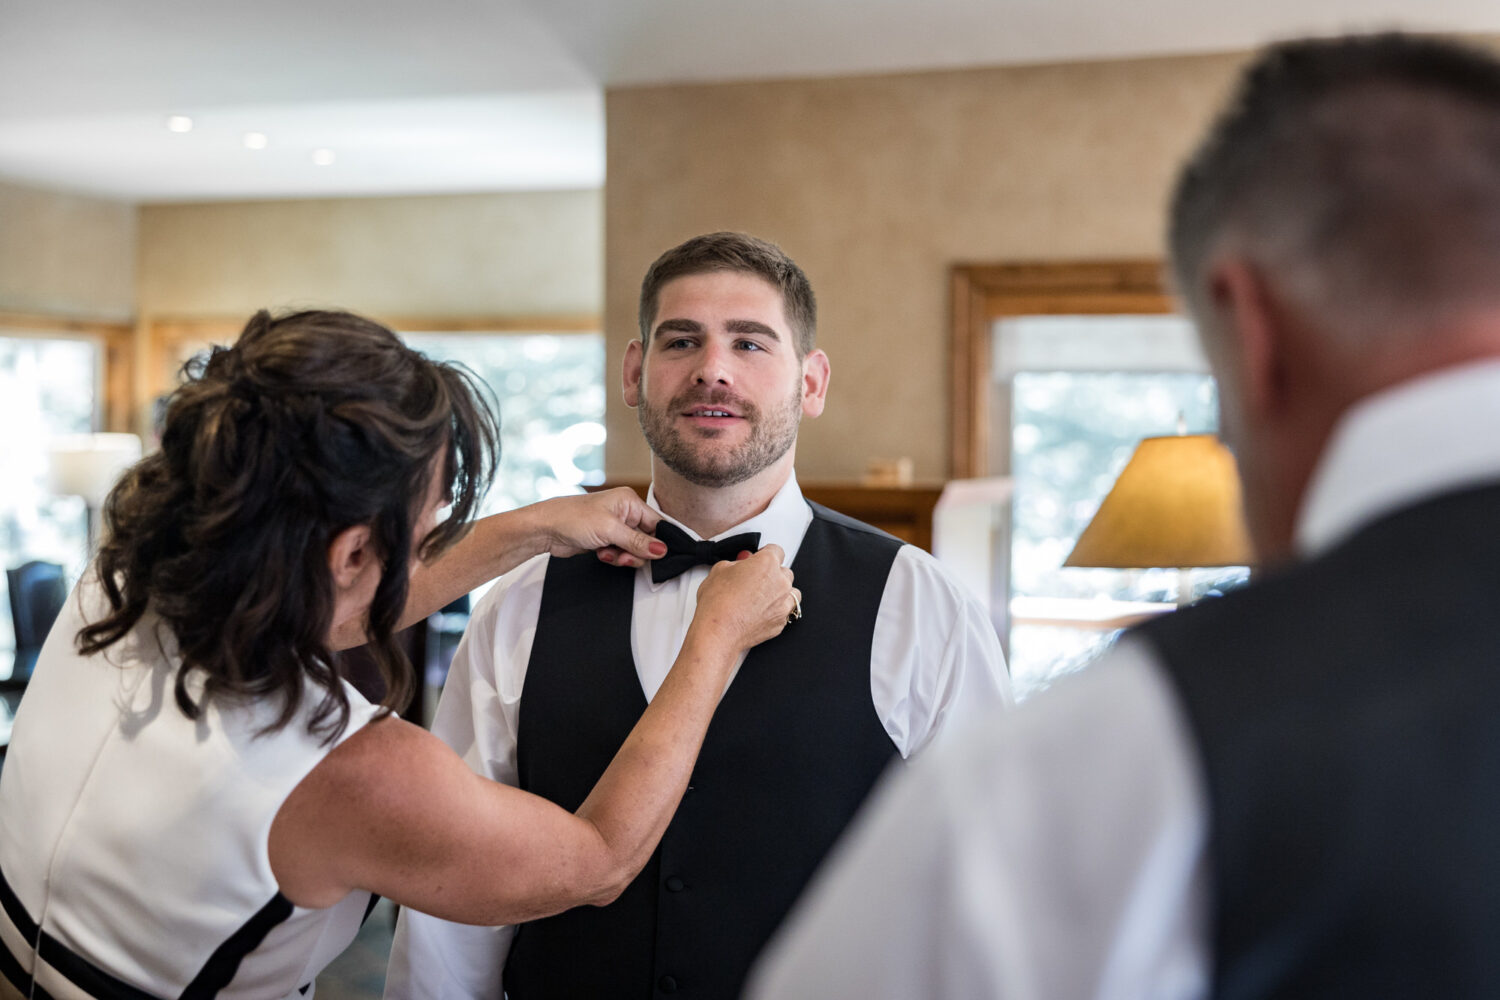 Family members help a groom get ready for a wedding in Incline Village.